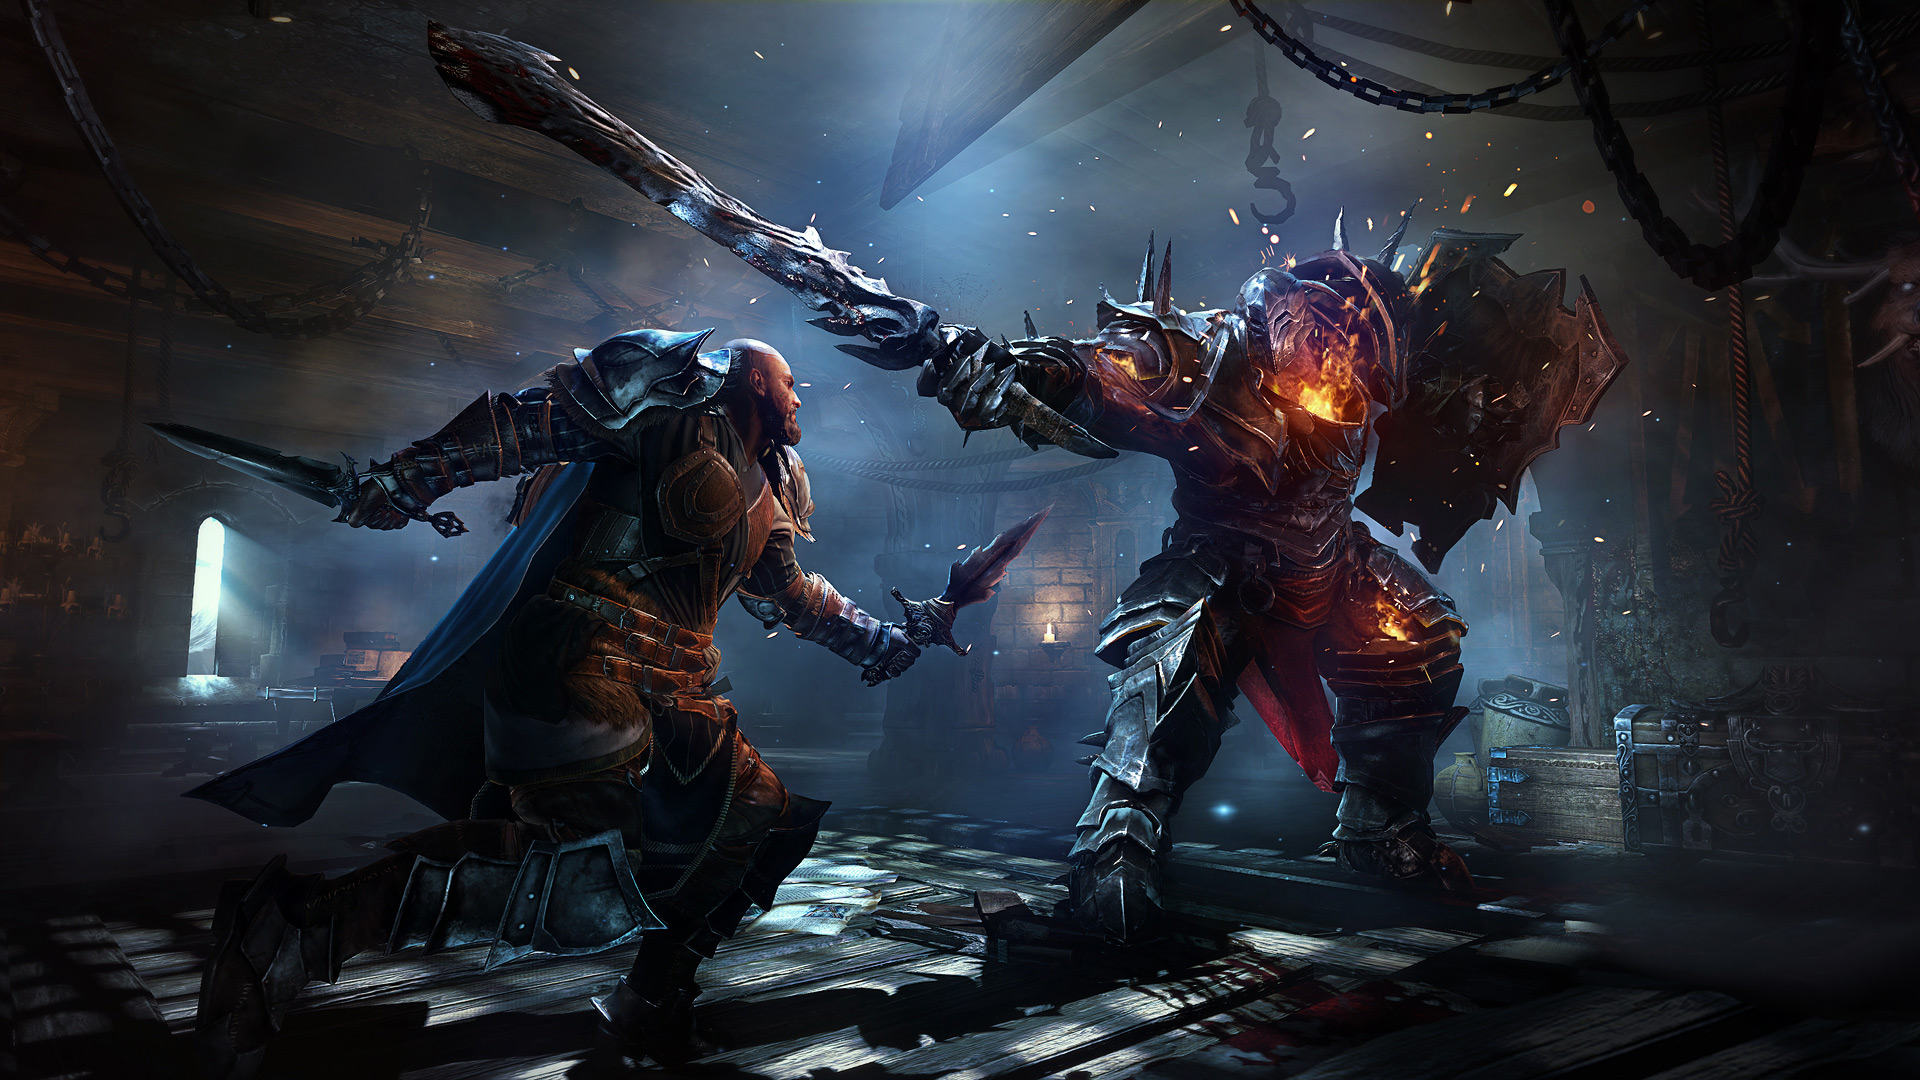 Lords of the Fallen no Steam